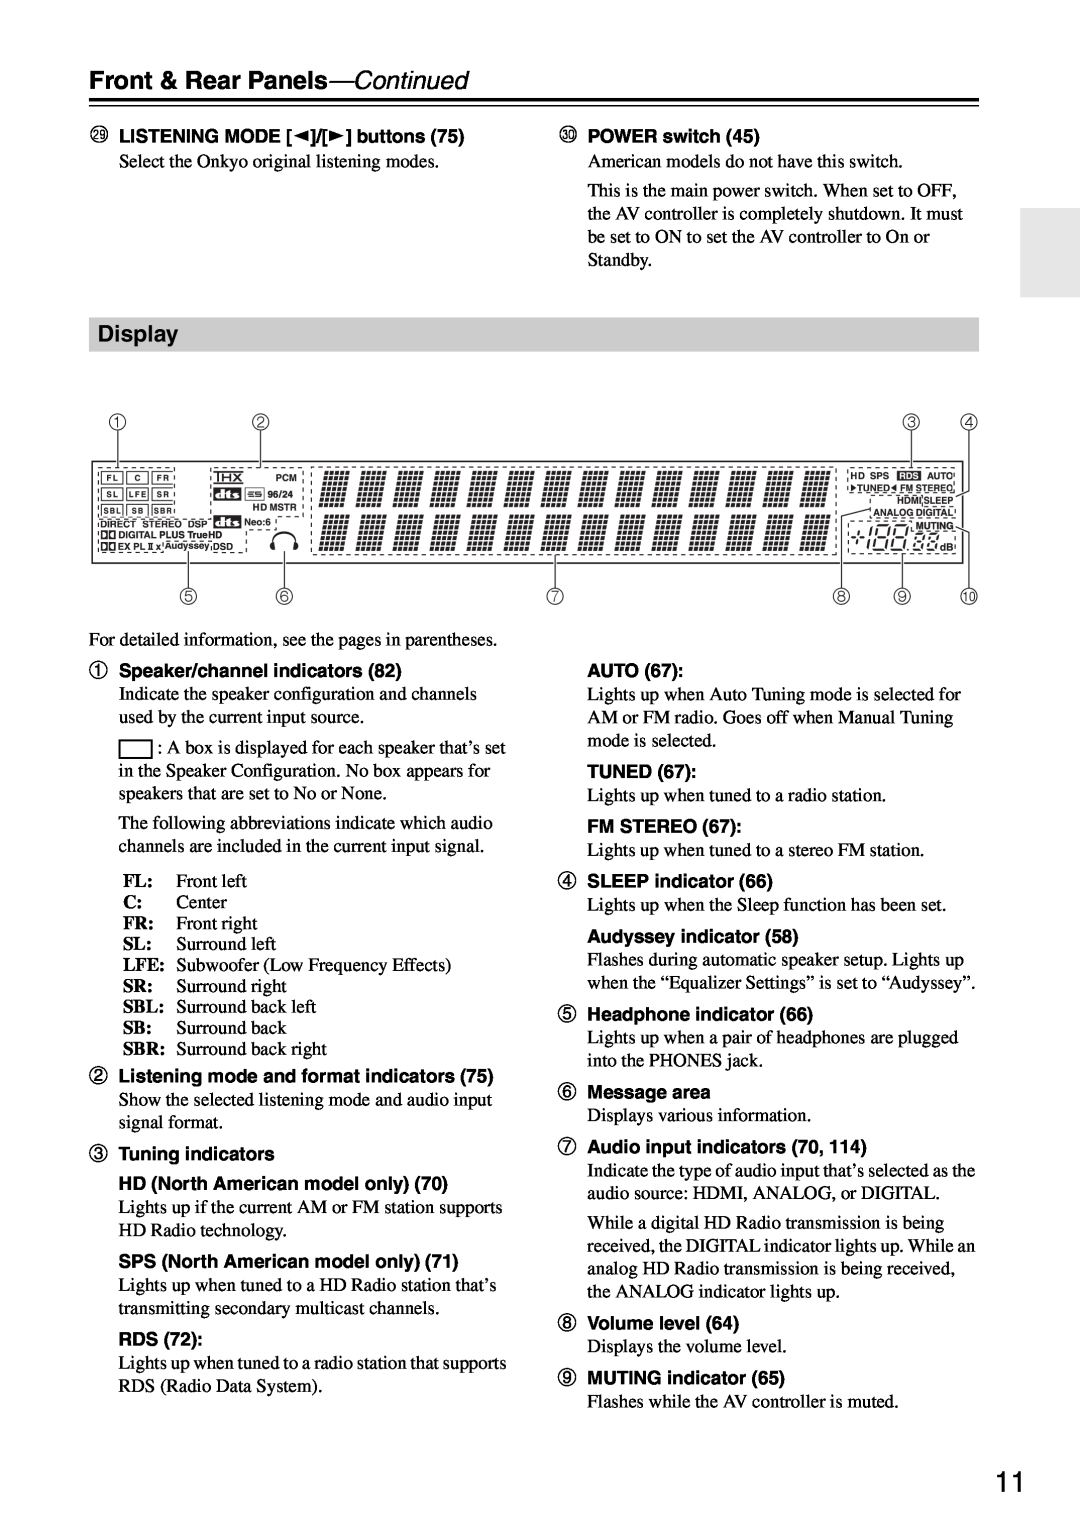 Onkyo PR-SC886 instruction manual Display, Front & Rear Panels—Continued, 8 9 bk 